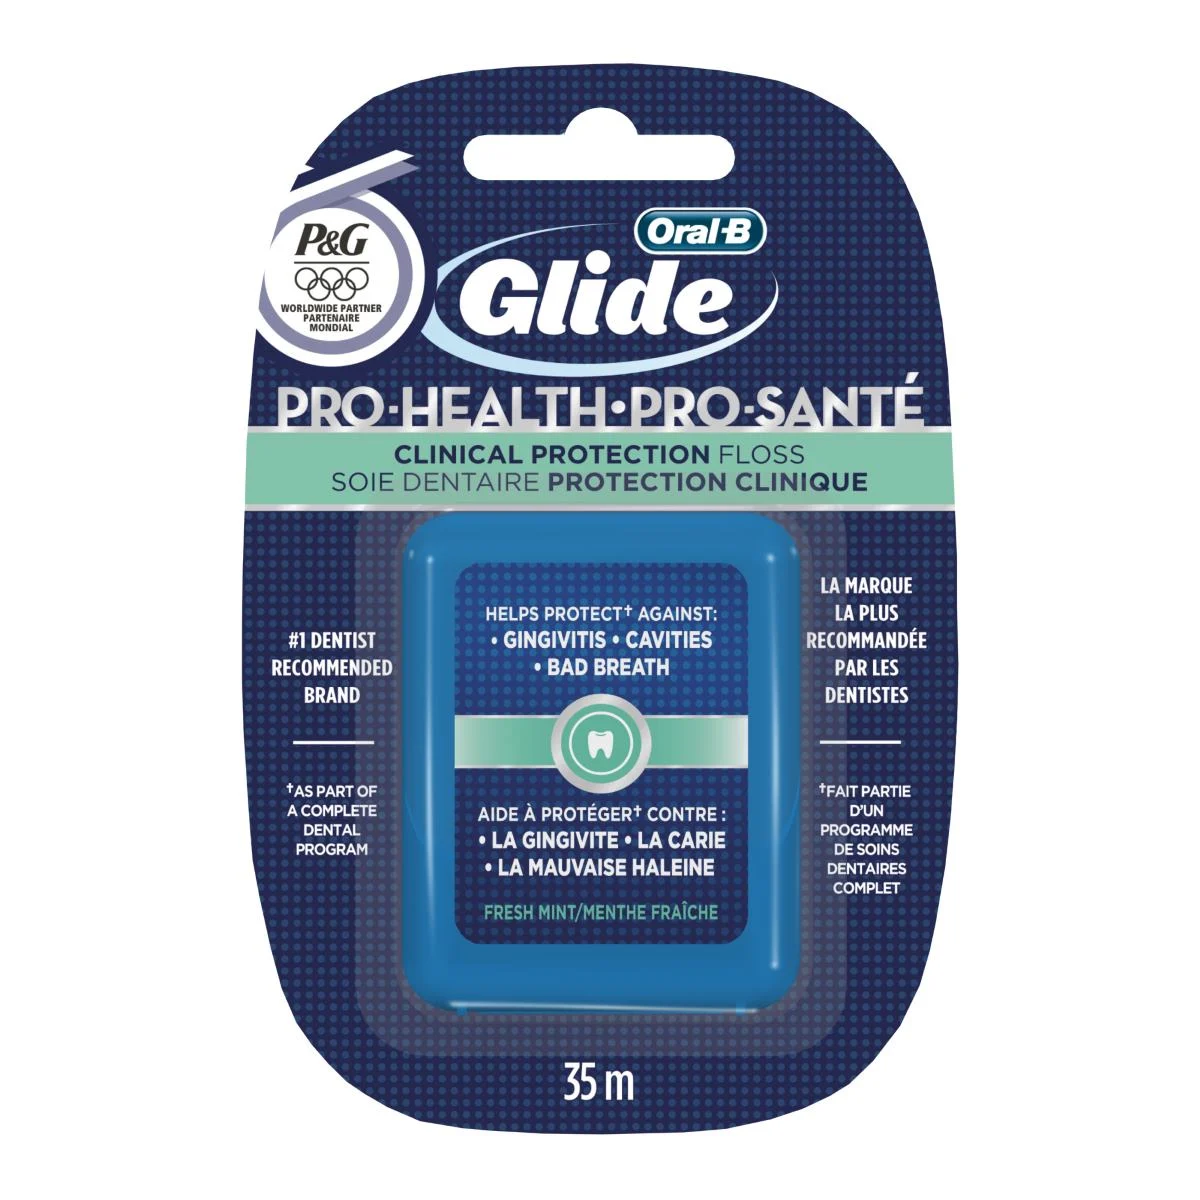 Oral-B Glide Pro-Health Clinical Protection Mint Floss undefined